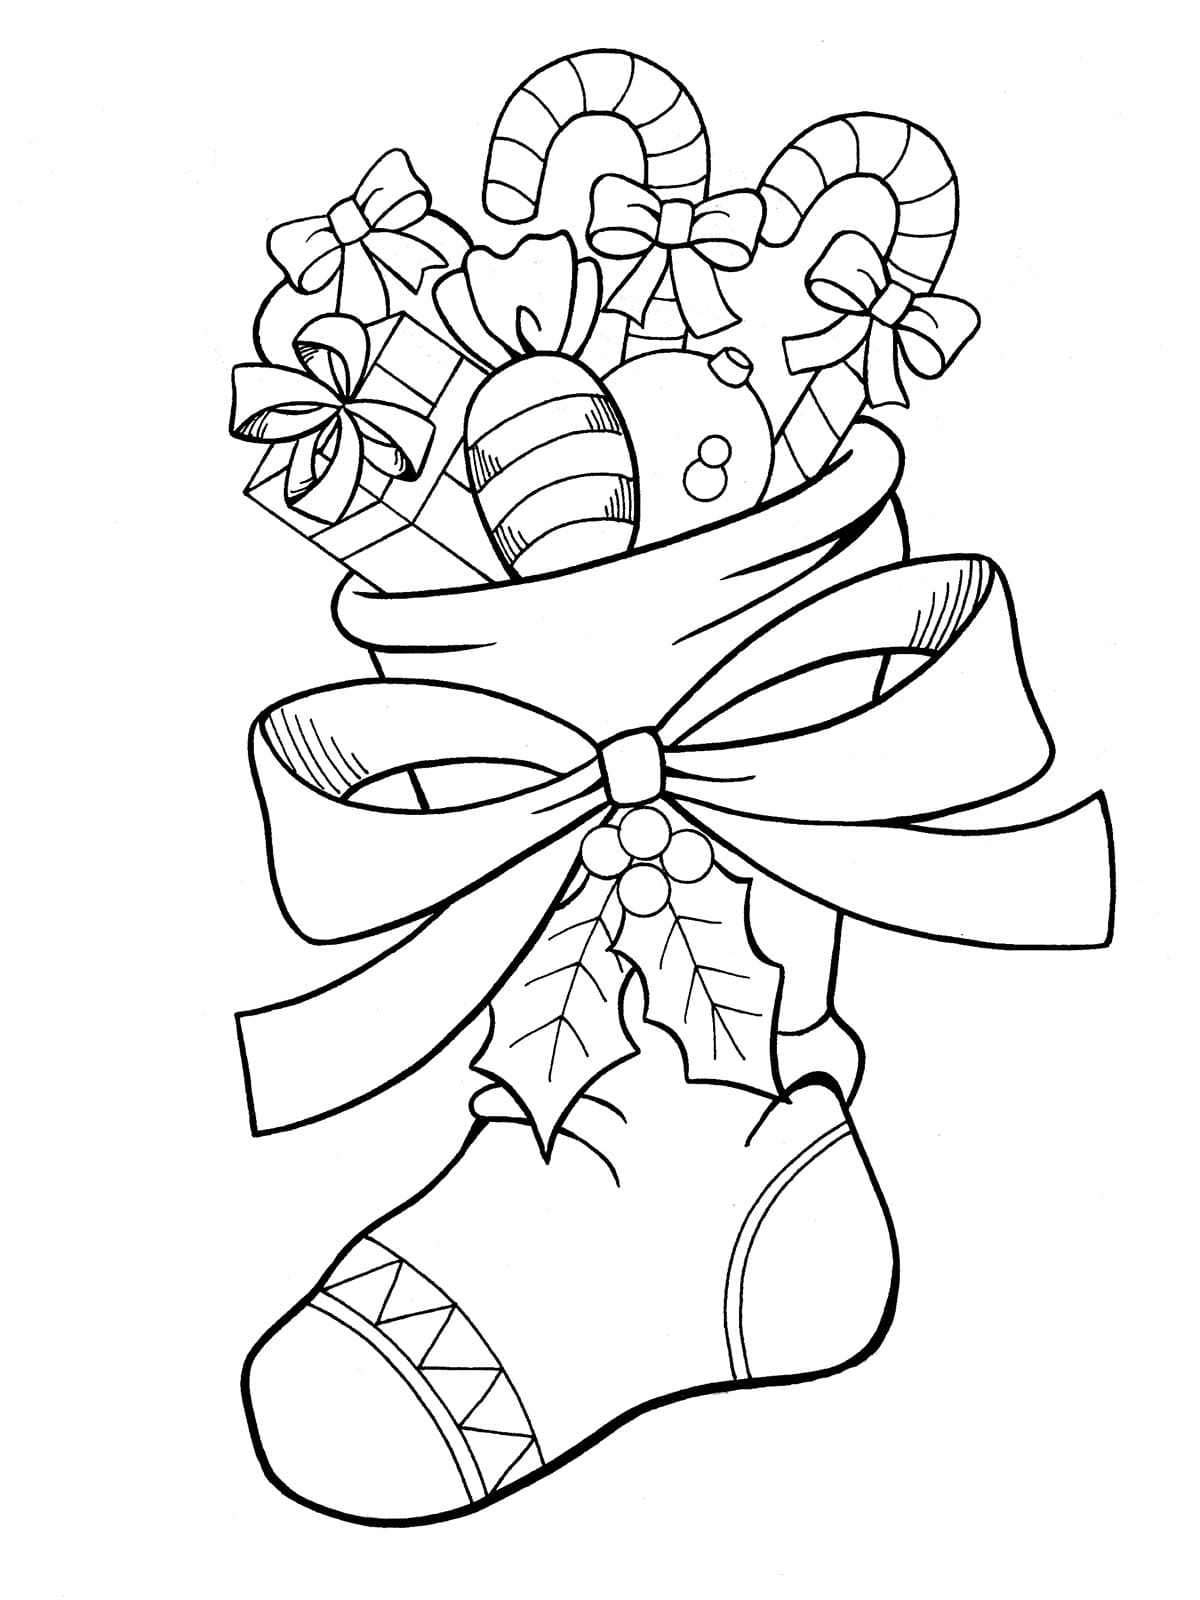 Christmas Sock By The Fireplace Coloring Page